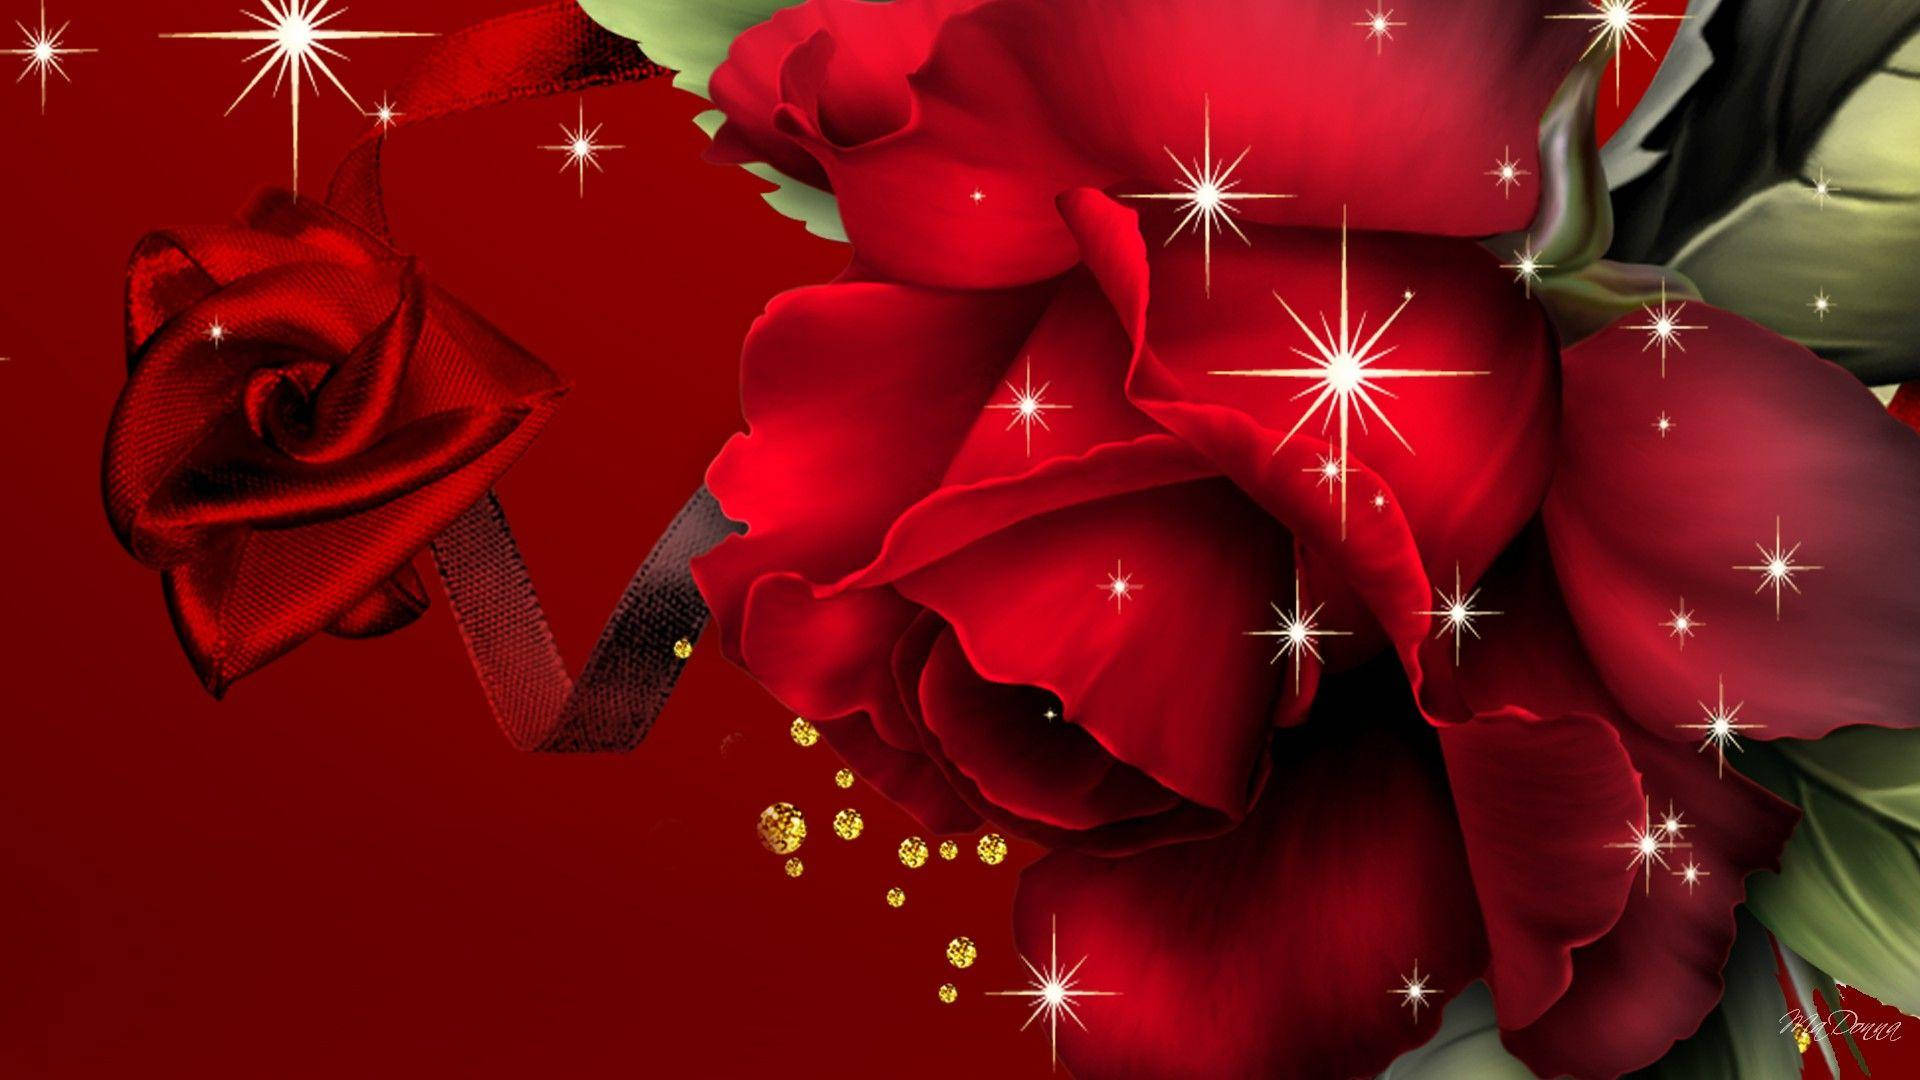 Beautiful Rose Hd Image With Sparkles